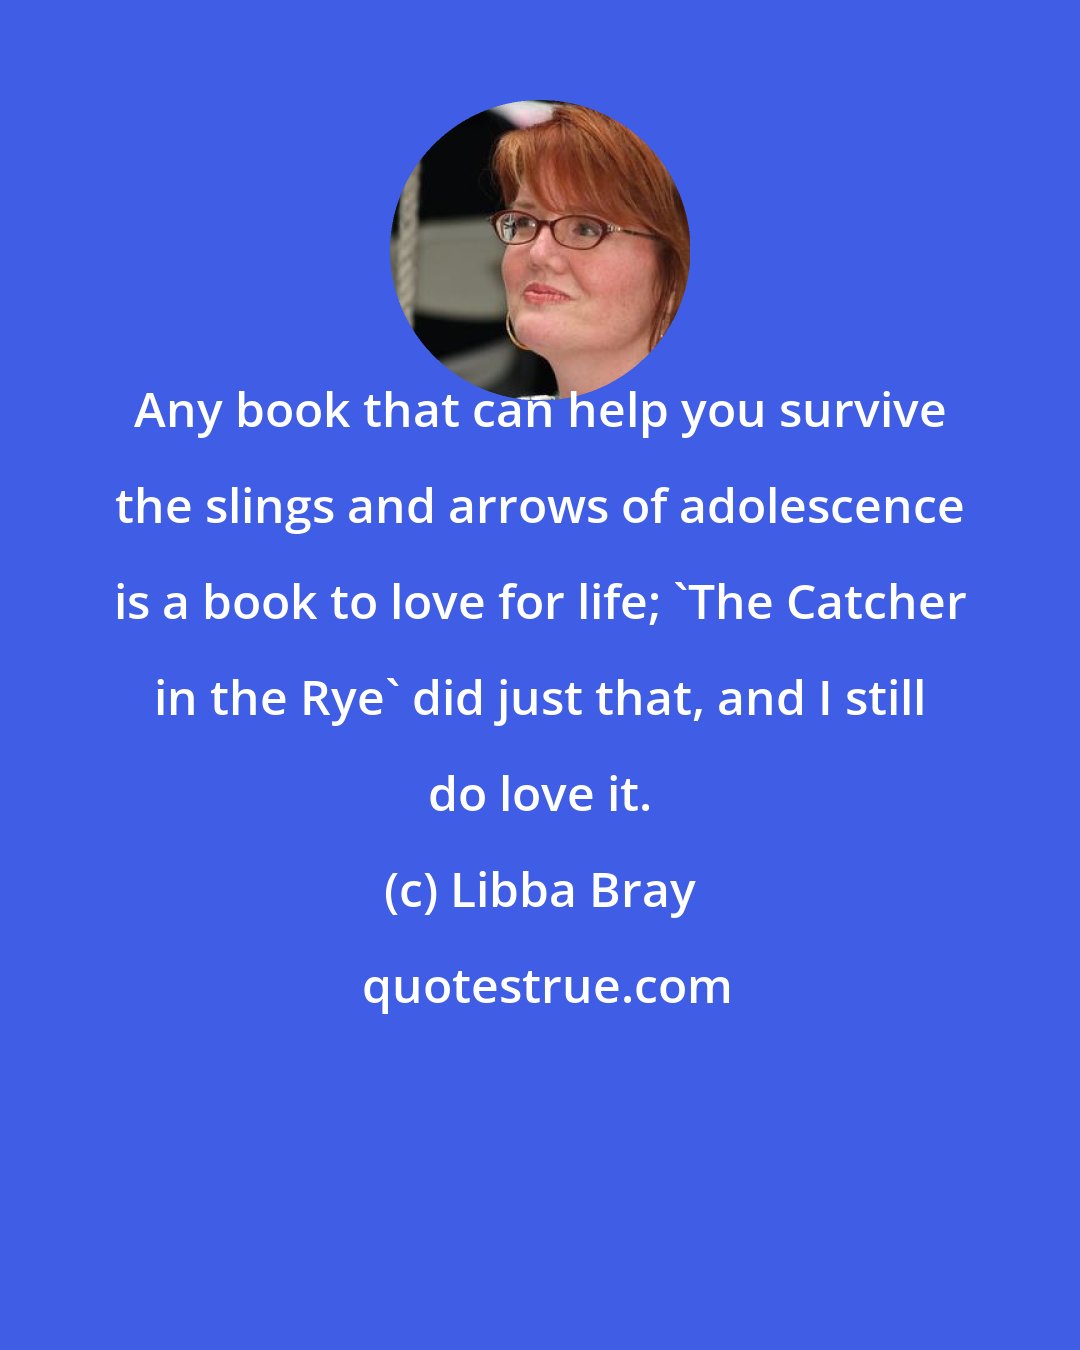 Libba Bray: Any book that can help you survive the slings and arrows of adolescence is a book to love for life; 'The Catcher in the Rye' did just that, and I still do love it.